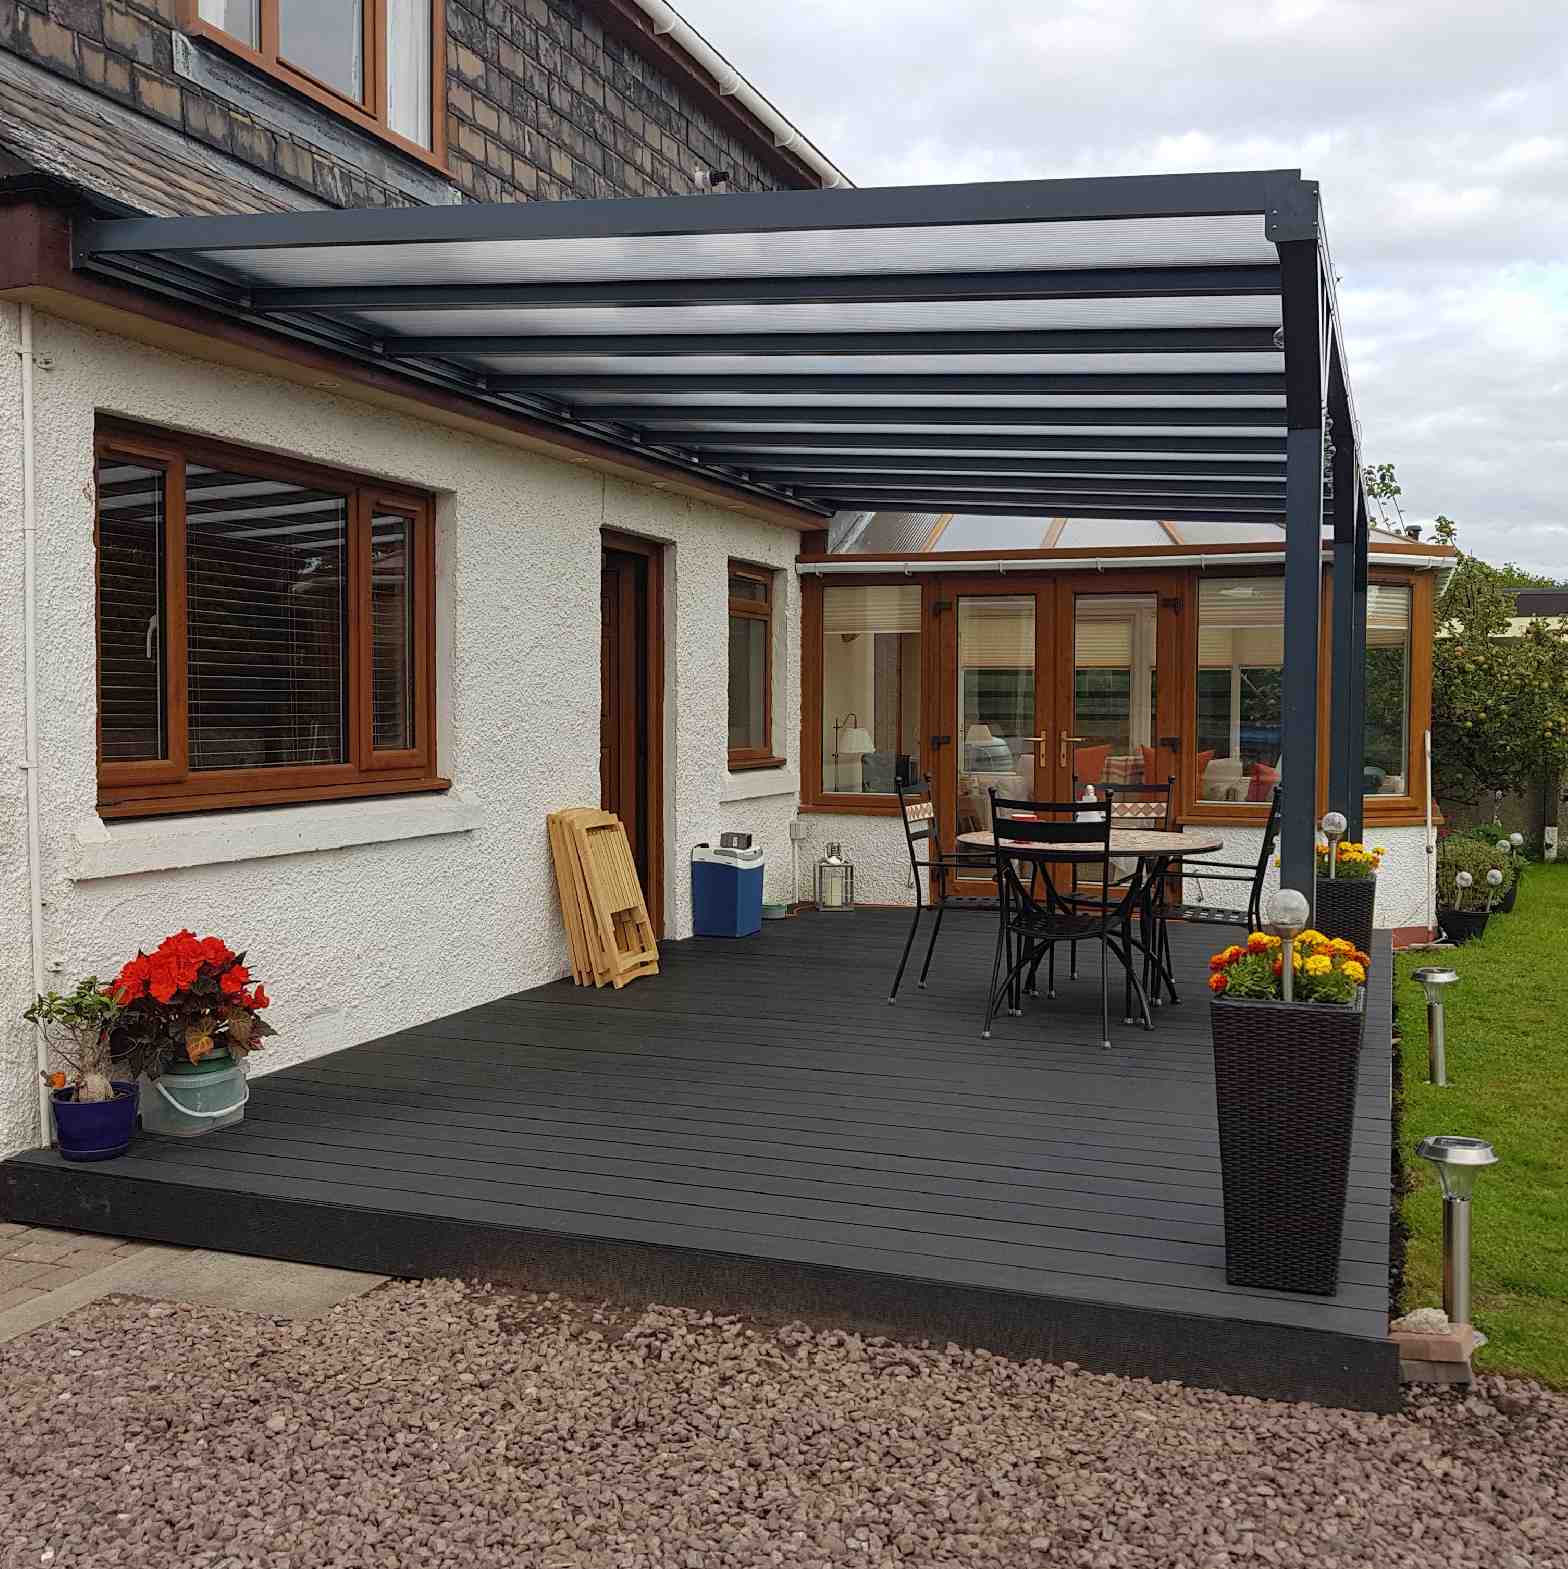 Buy Omega Verandah, Anthracite Grey, 16mm Polycarbonate Glazing - 6.0m (W) x 2.5m (P), (3) Supporting Posts online today